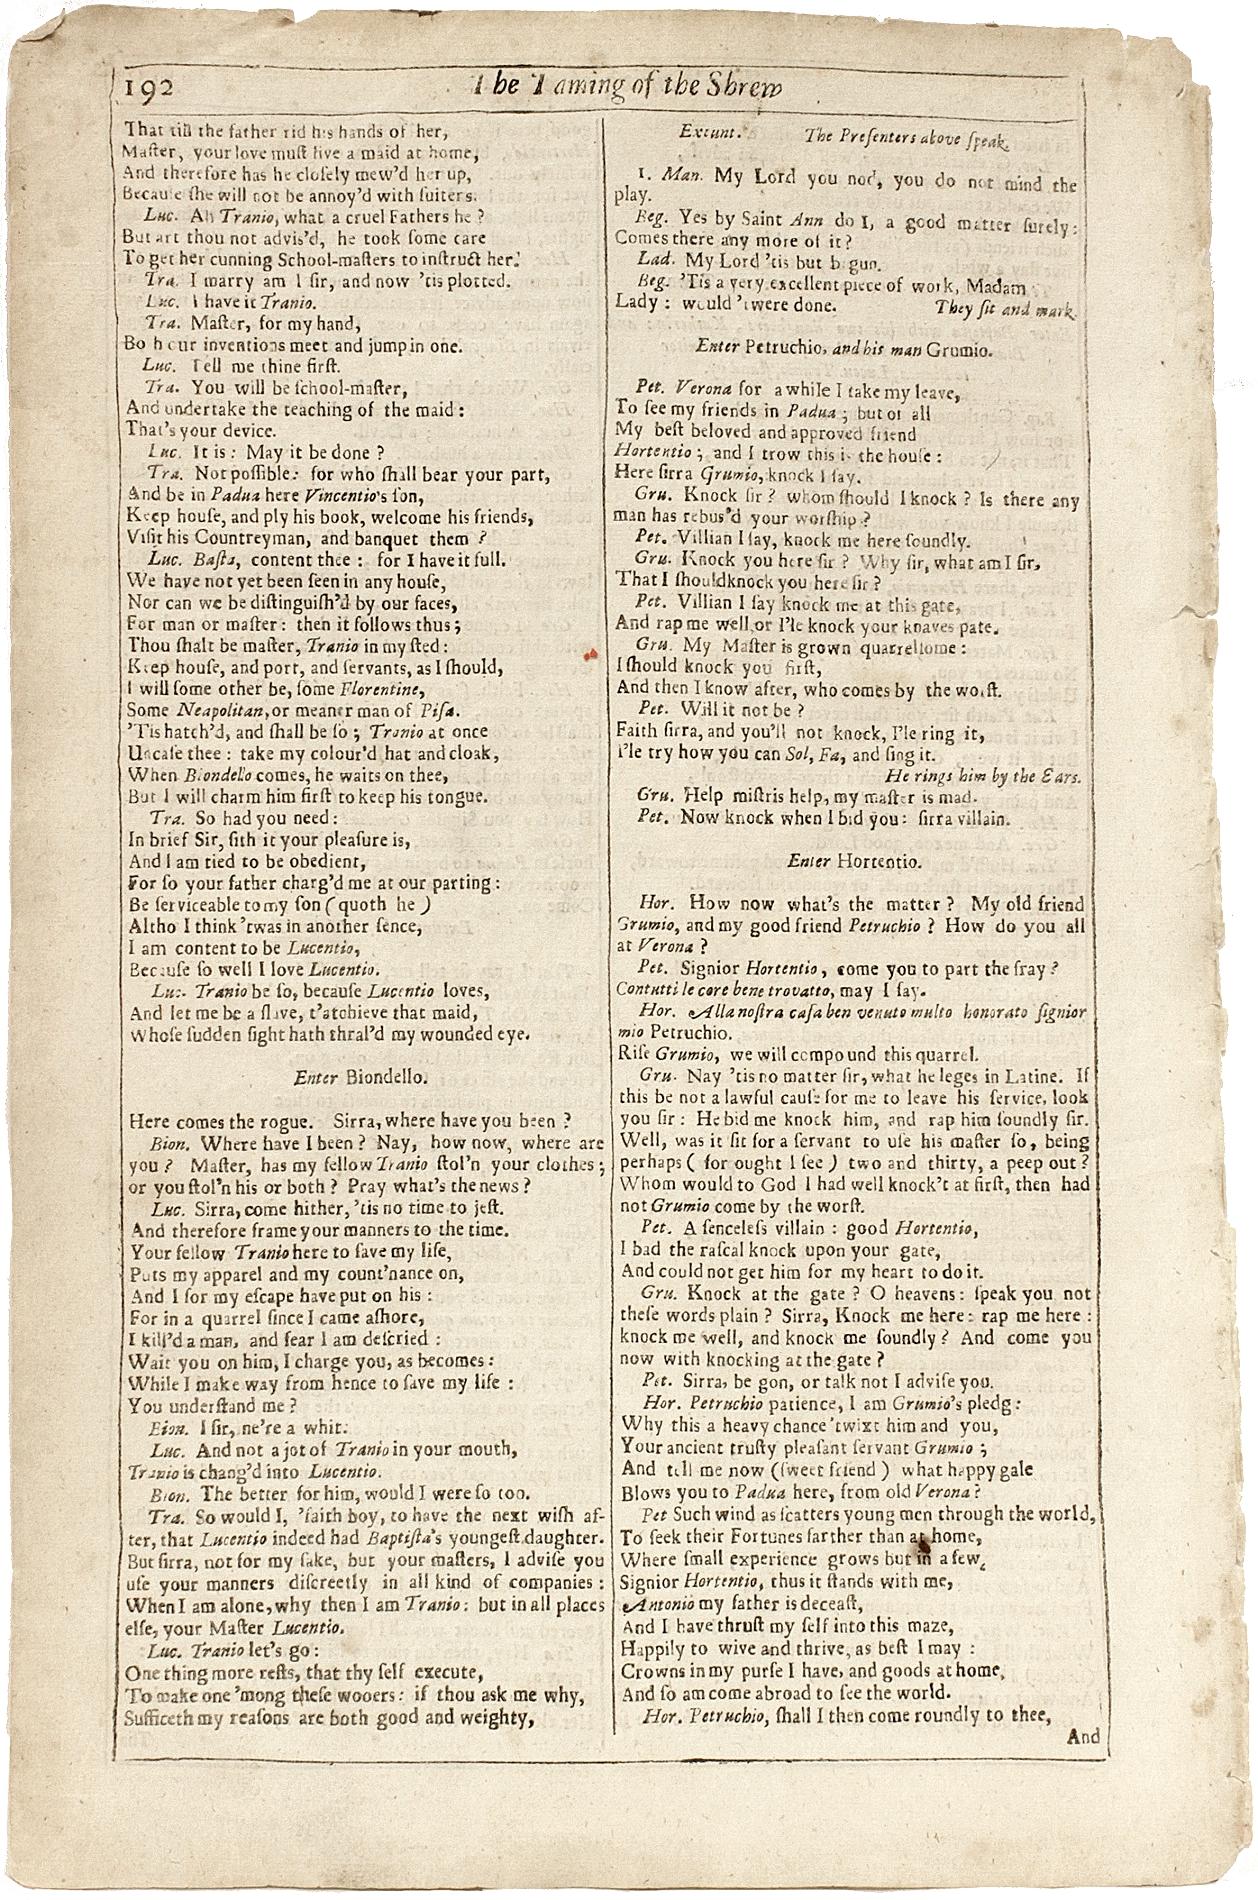 AUTHOR: SHAKESPEARE, William. 

TITLE: The Works of William Shakespeare. (The Taming of the Shrew) - page 187/192.

PUBLISHER: London: Printed for H. Herringman, E. Brewster and R. Bentley, 1685.

DESCRIPTION: THE FOURTH FOLIO. 187/192p.,